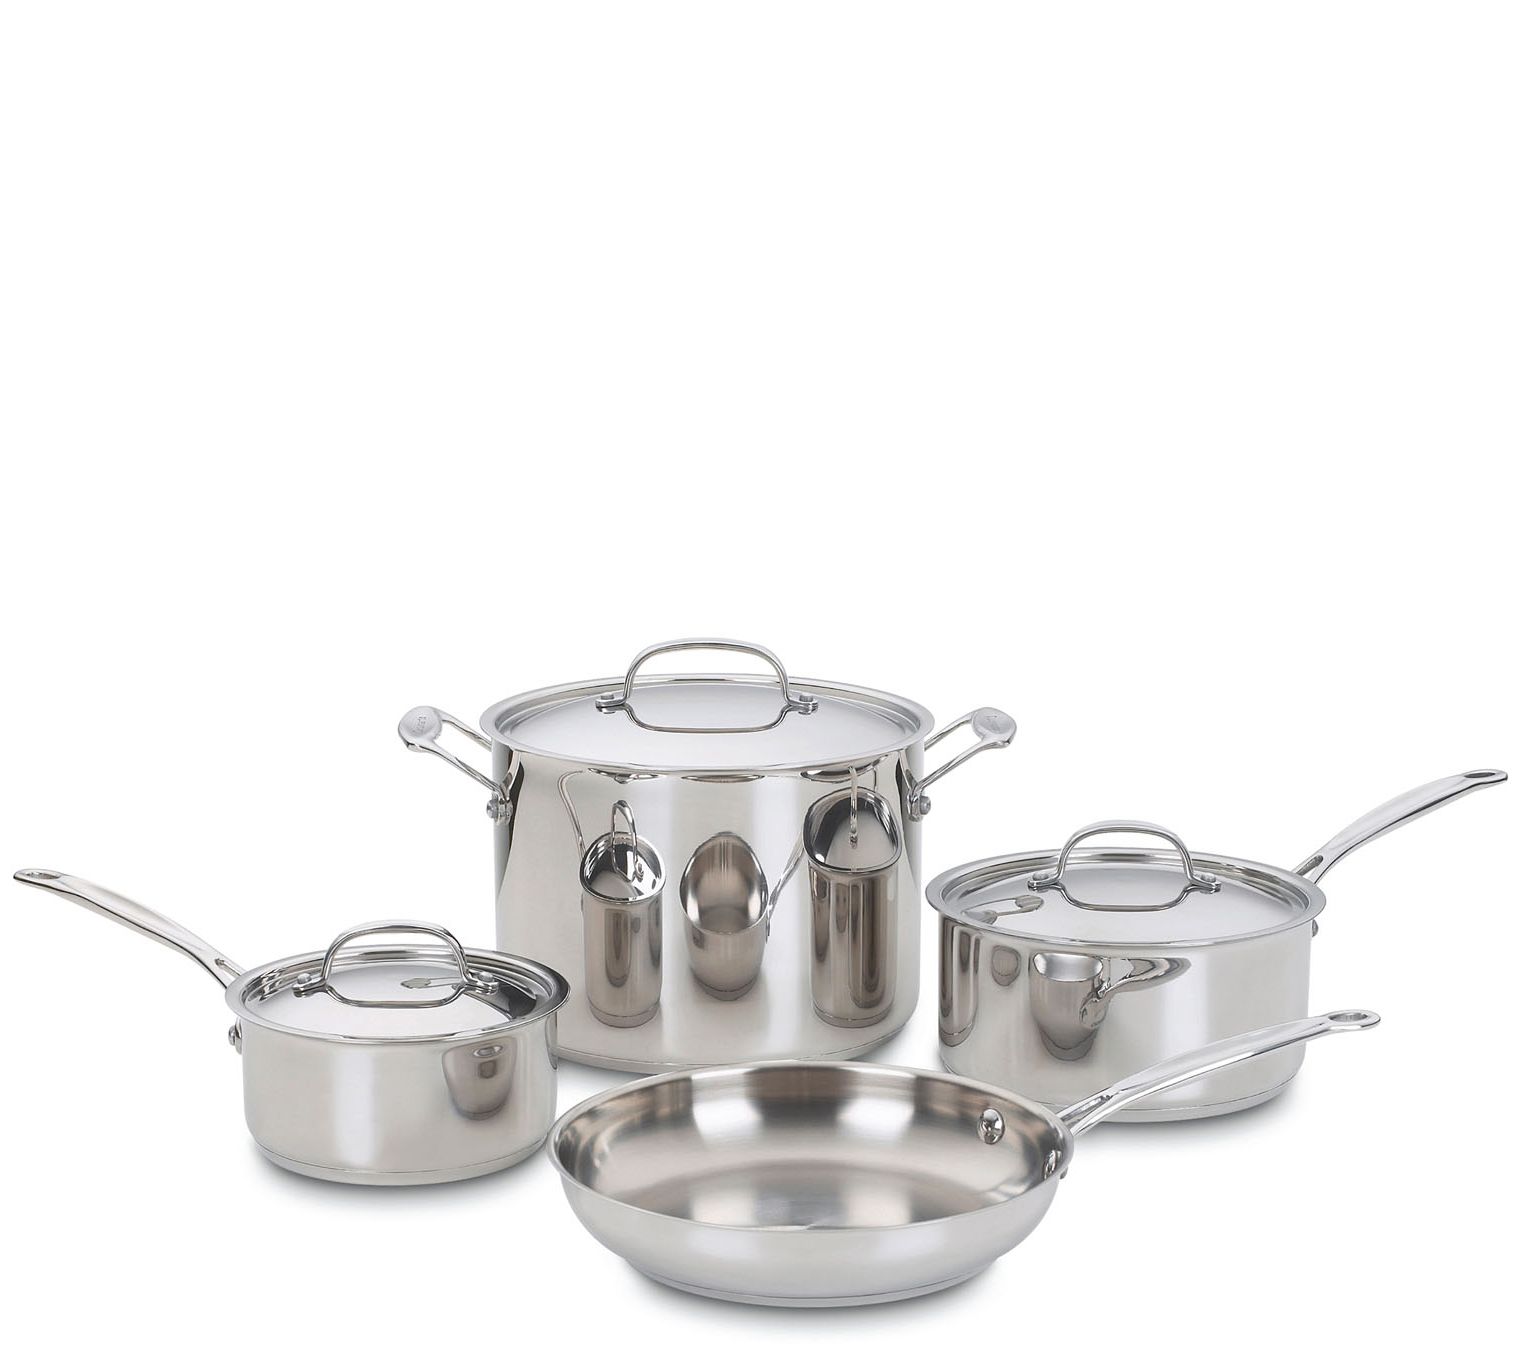 Cuisinart 76I-11 11 Piece Chef's Classic Pro Cookware Set in